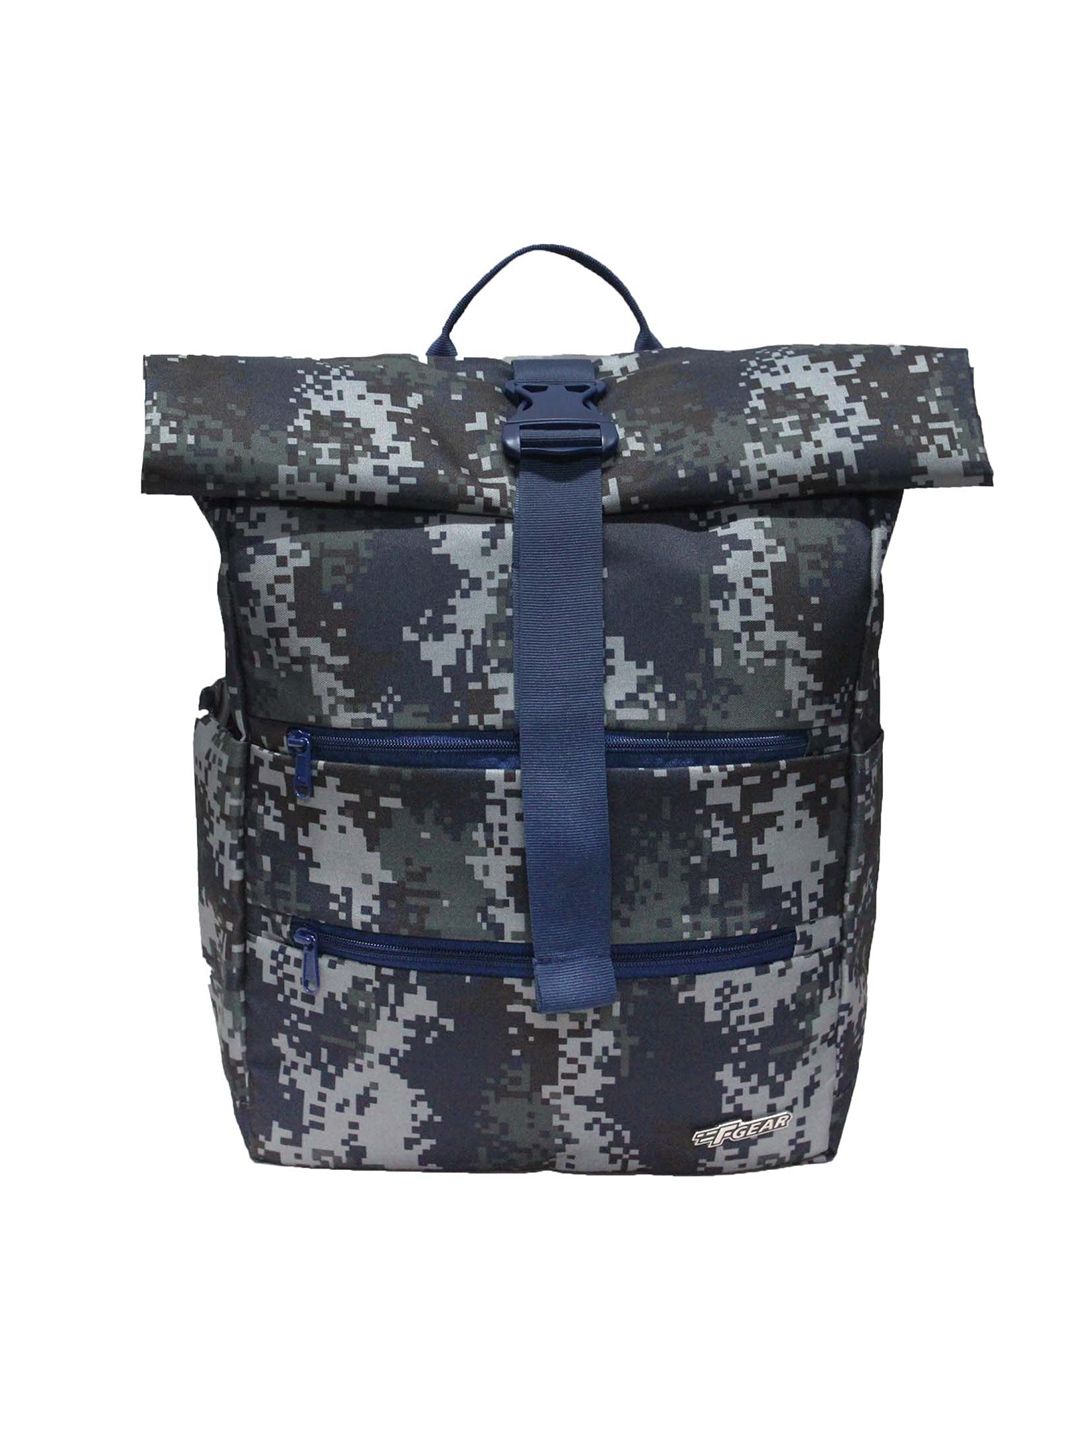 F Gear Unisex Blue & Grey Printed Backpack Price in India